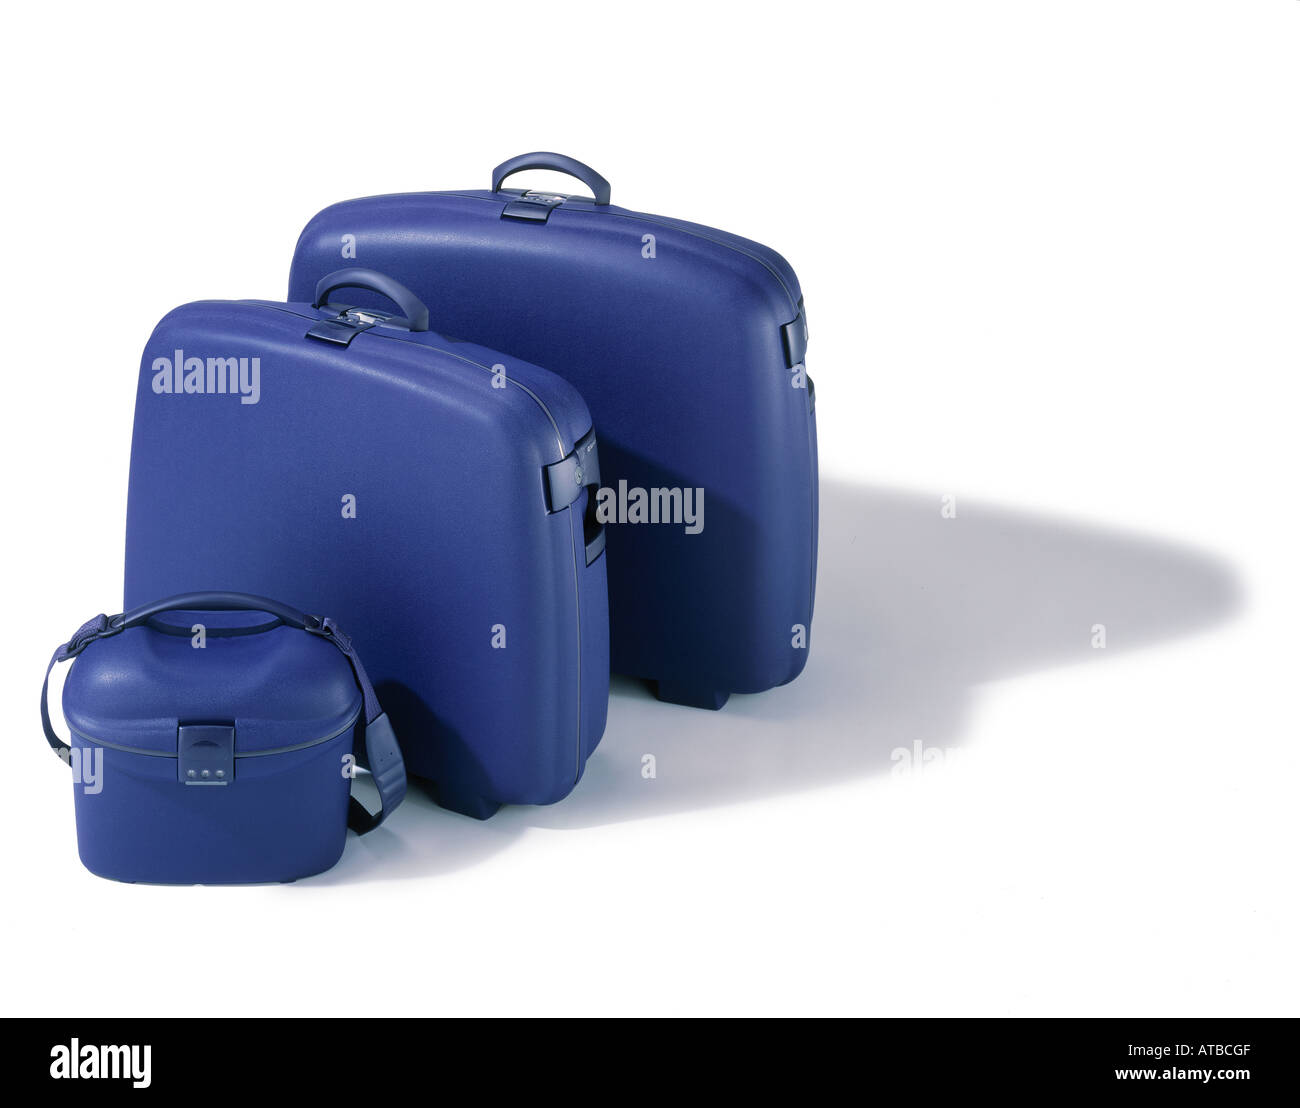 A set of blue suitcases Stock Photo